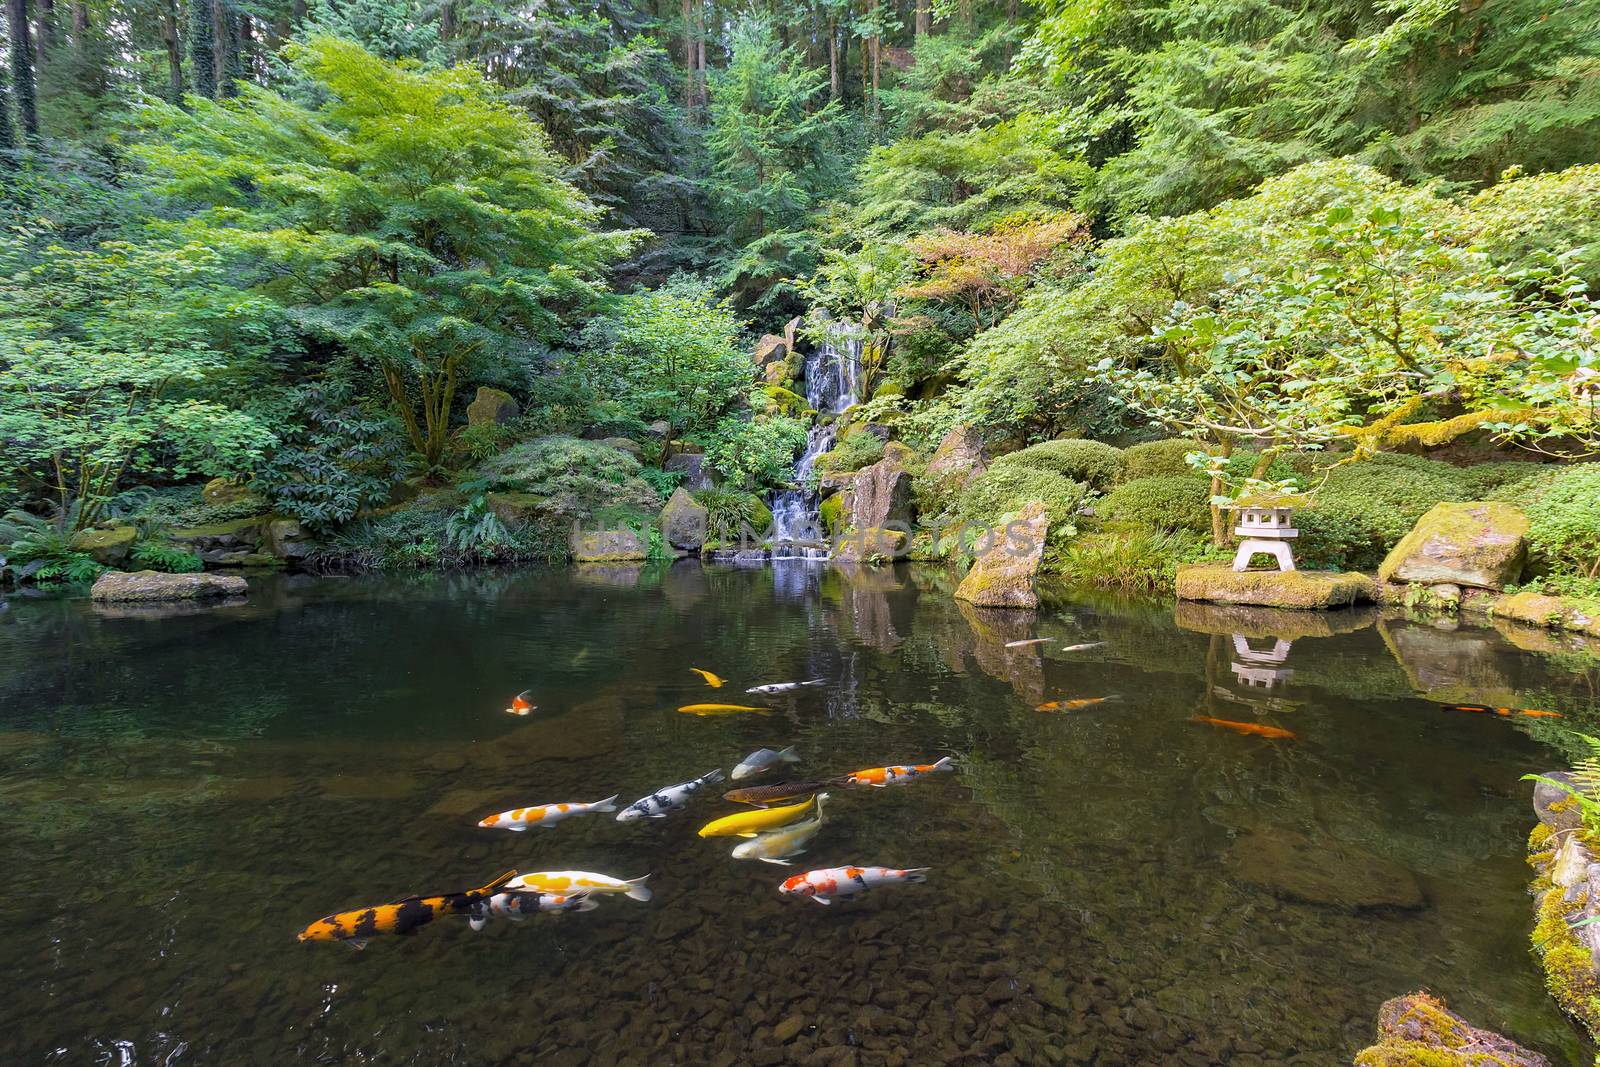 Koi Fish swimming in pond by Heavenly Falls waterfall in Japanese Garden